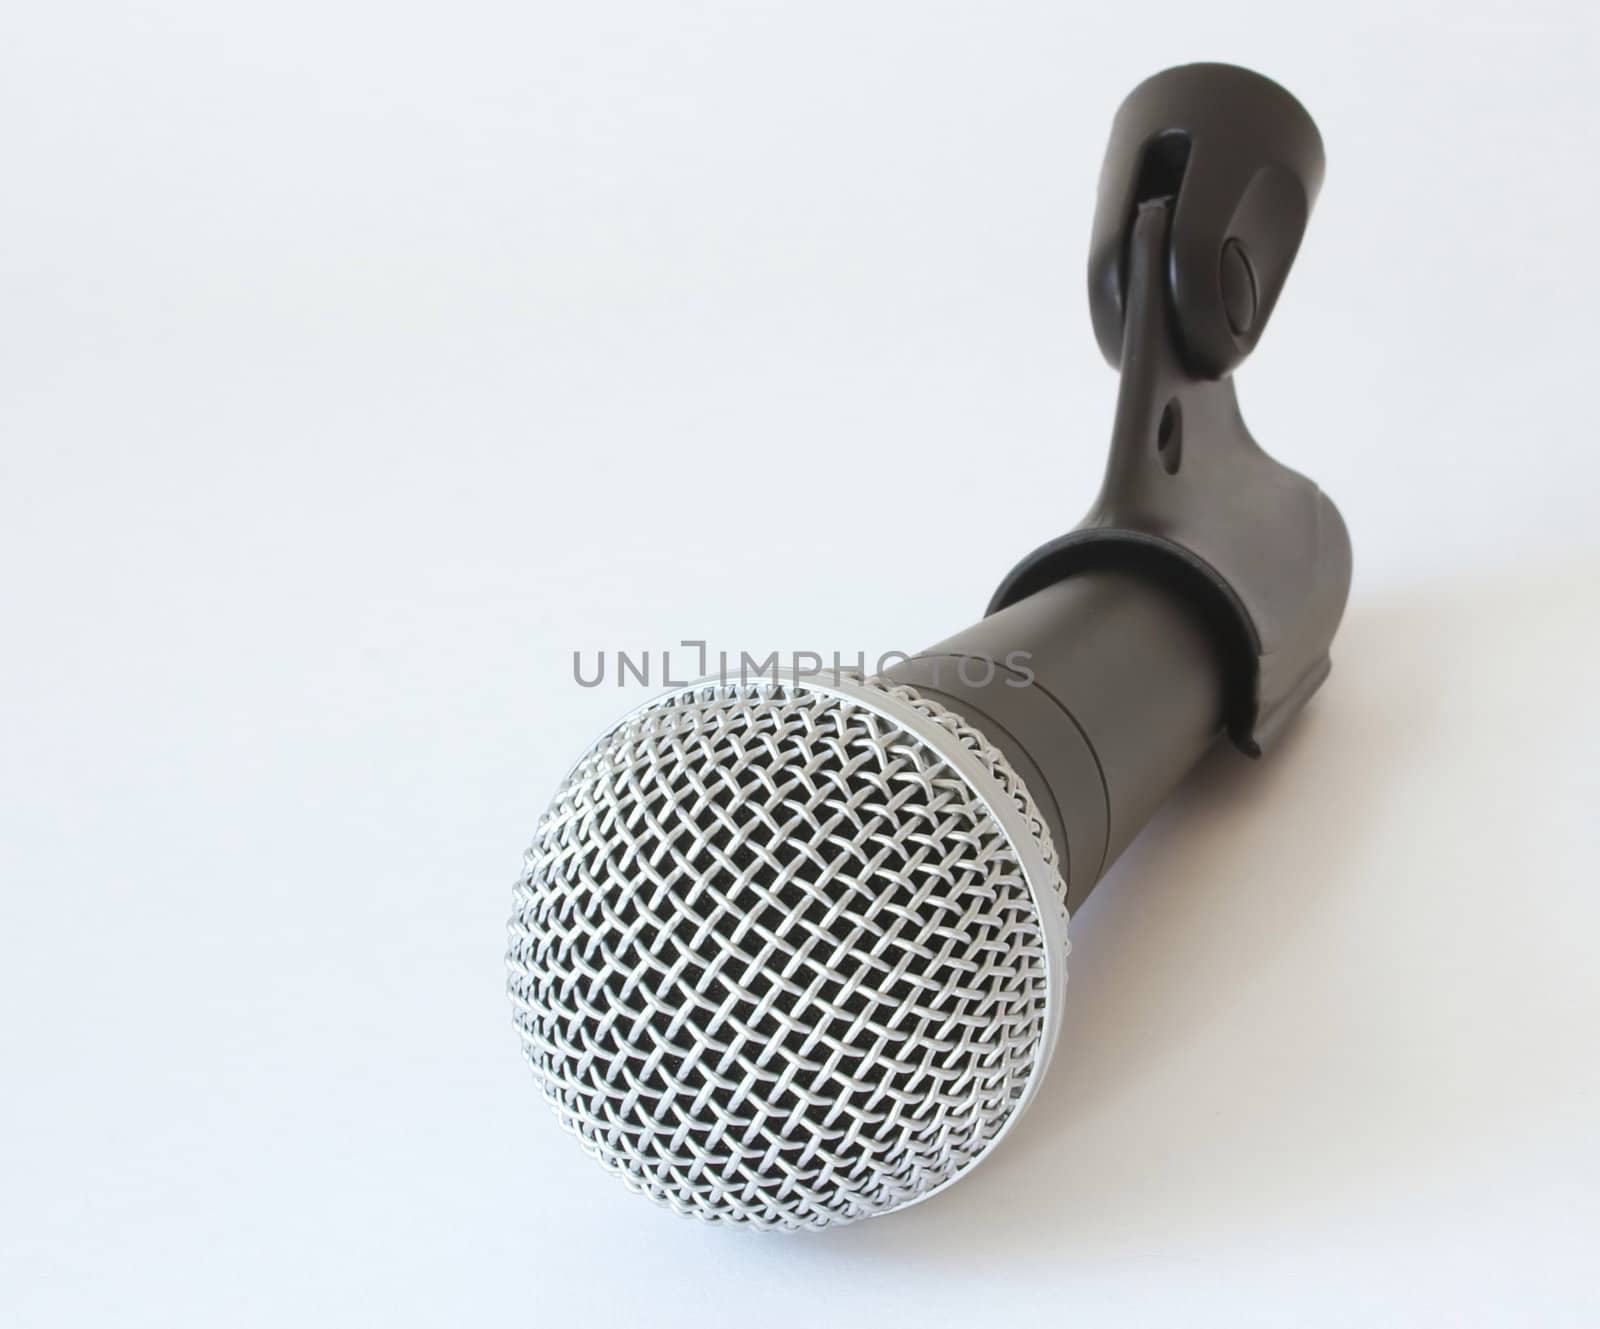 microphone in its holder attachment